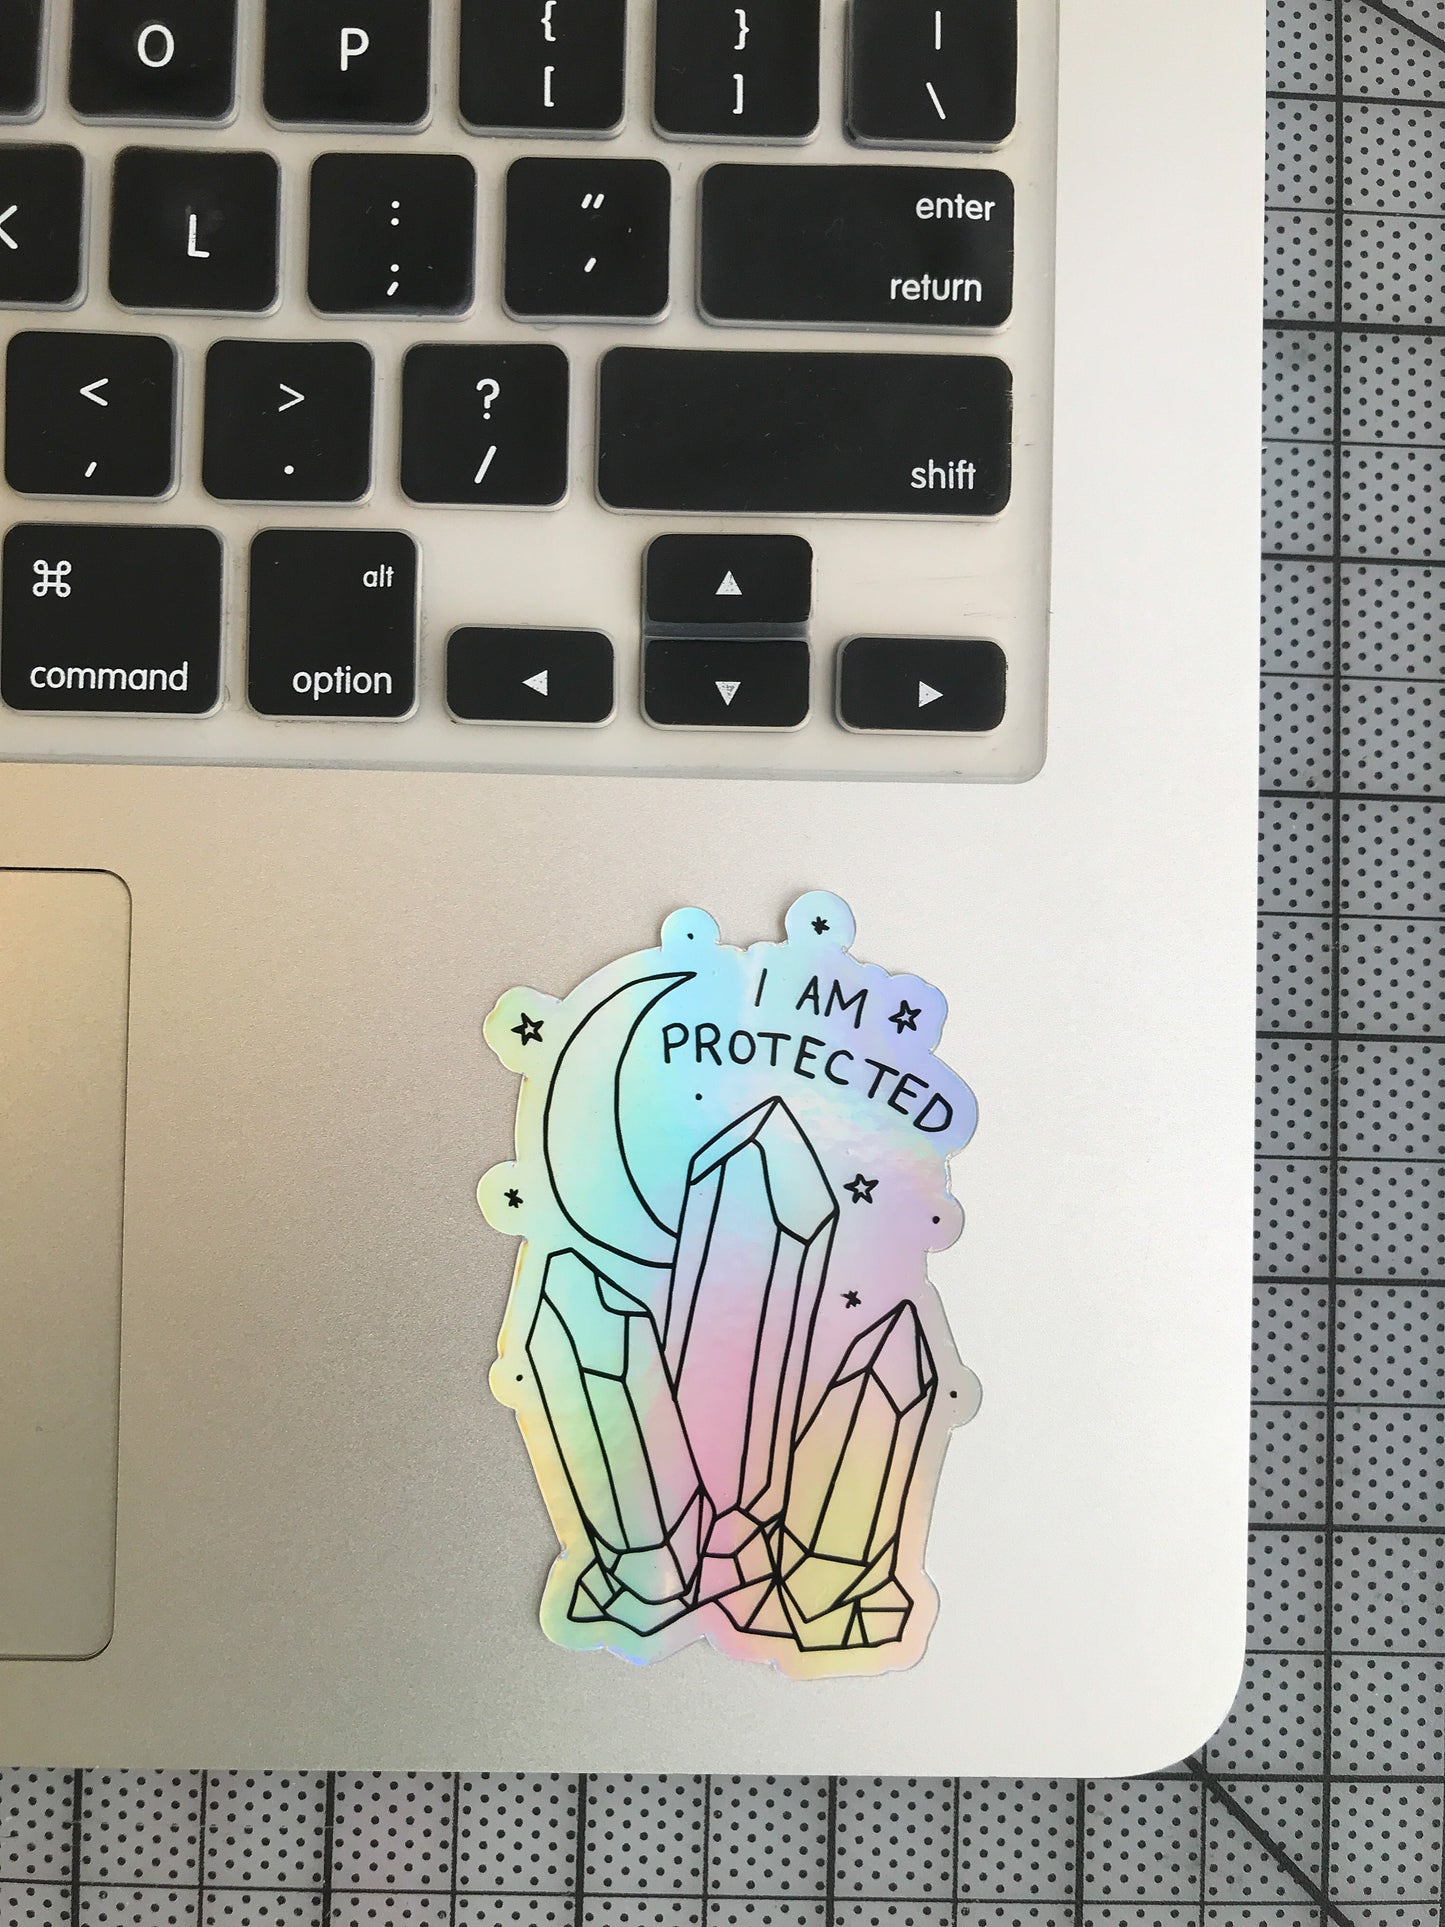 "I Am Protected" holographic sticker on laptop pad